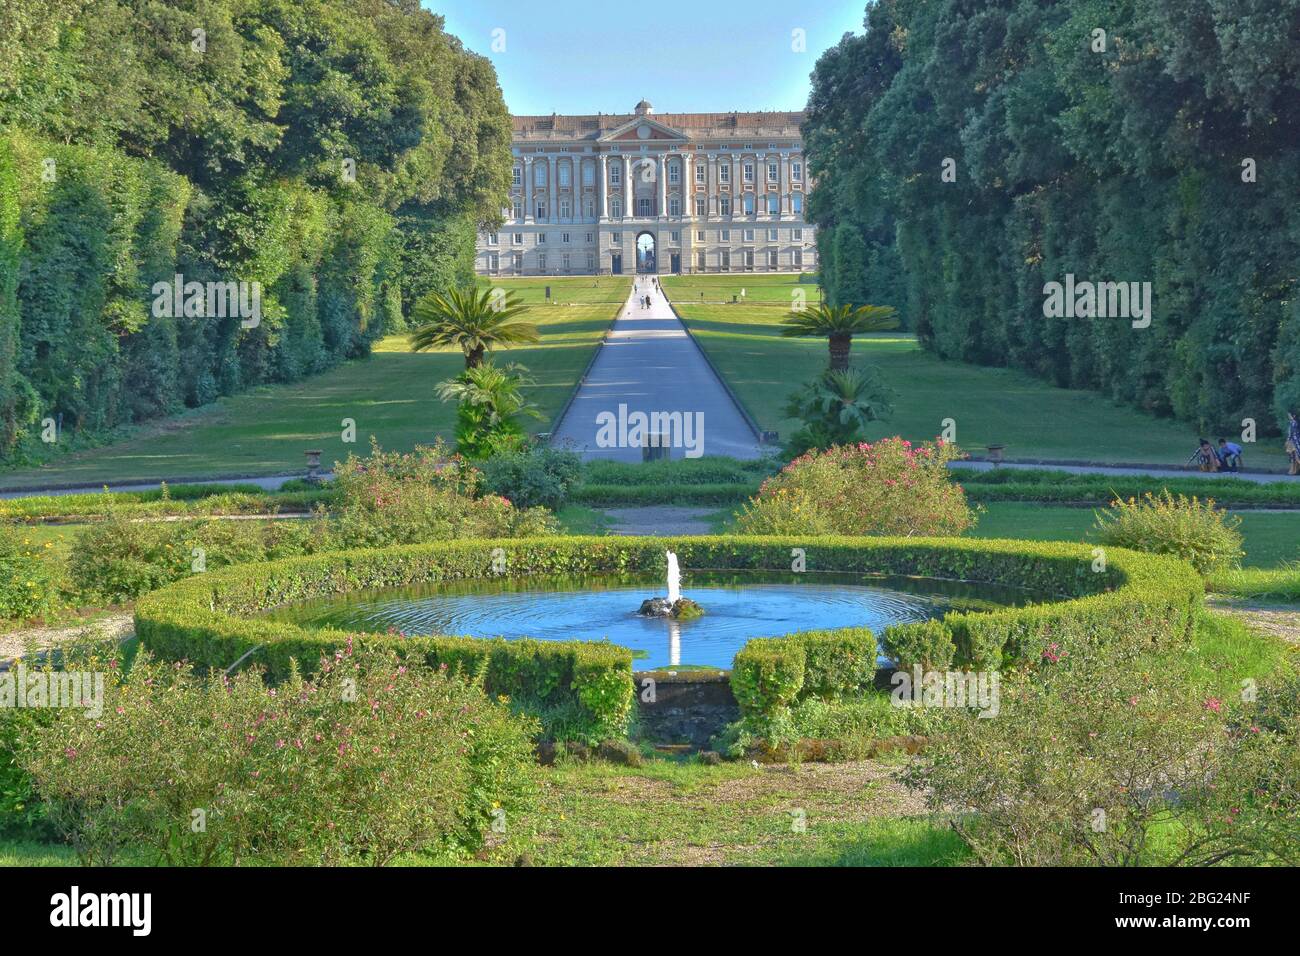 The gardens of the Royal Palace of Caserta, Italy Stock Photo